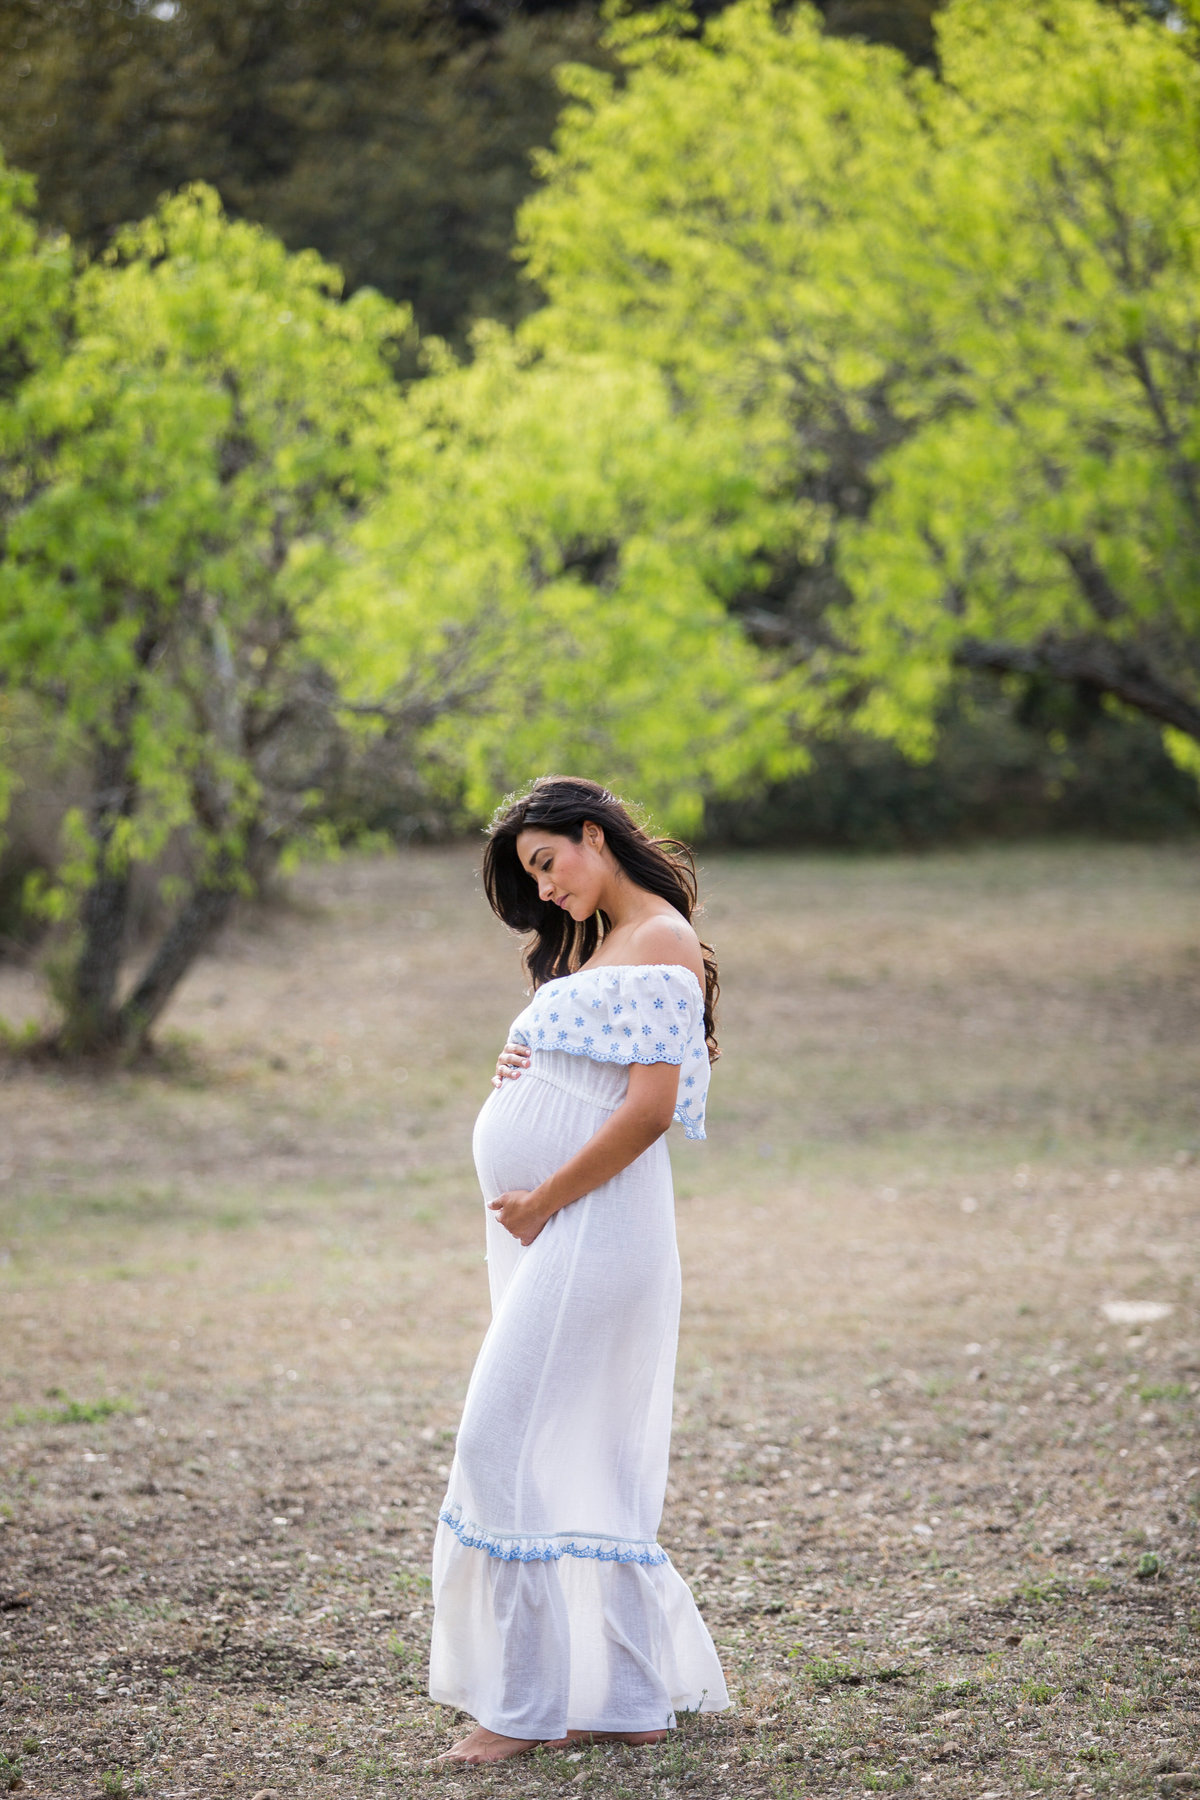 Pregnant mother in see-through maternity white dress standing in field at Denman Estate Park in San Antonio.